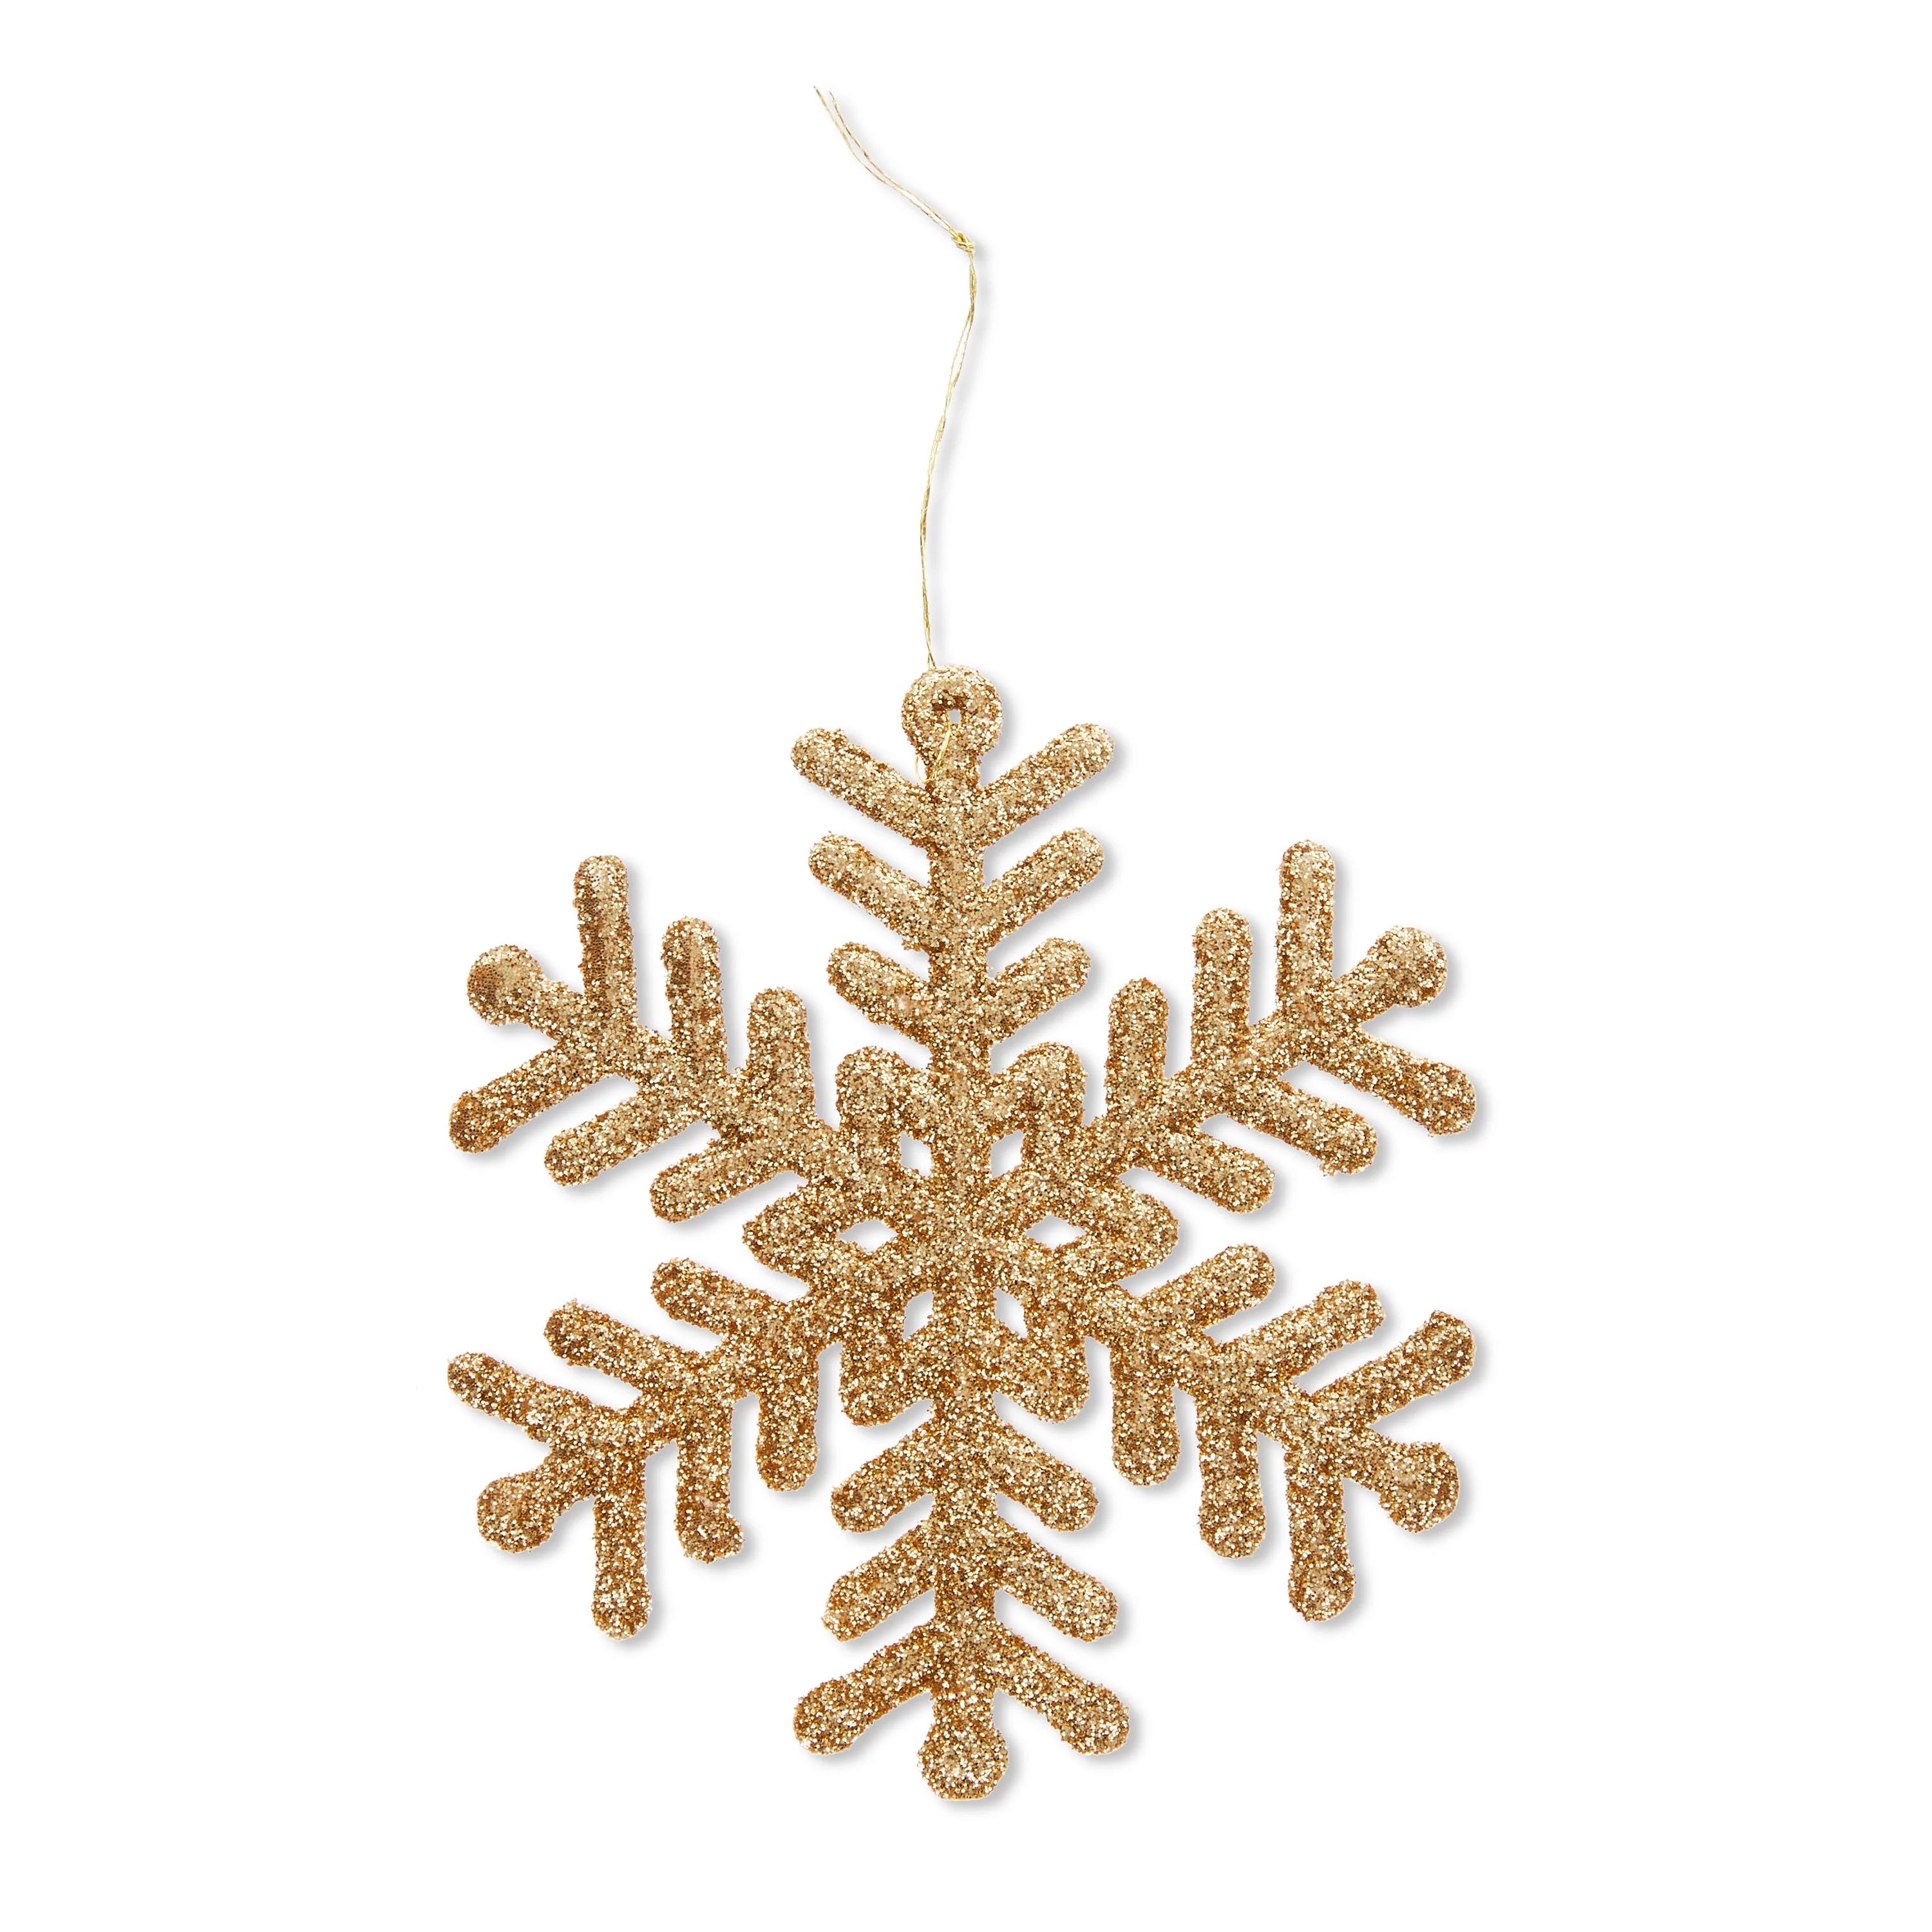 Glitter Snowflake Ornaments, 20 Count, by Holiday Time | Walmart (US)